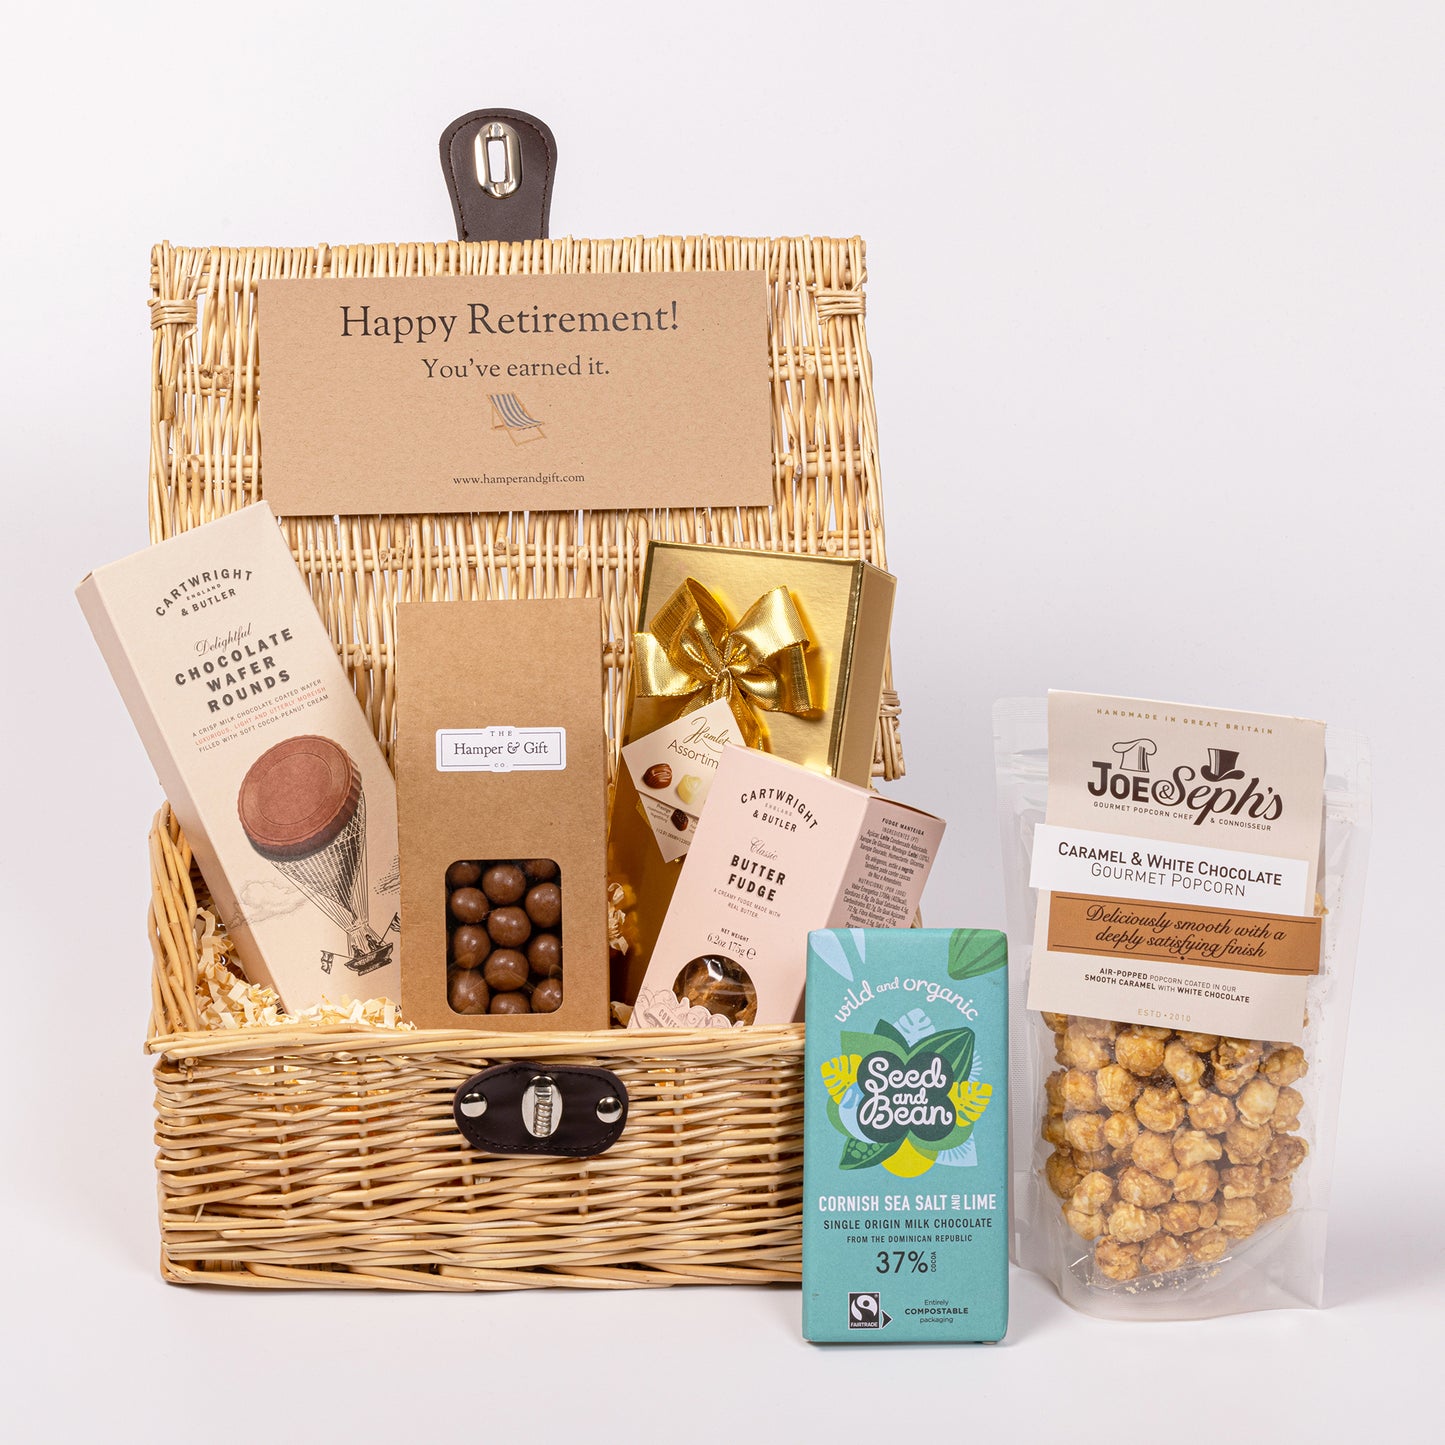 Retirement Chocolate & Fudge Hamper filled with a variety of chocolate, fudge, biscuit and gourmet popcorn